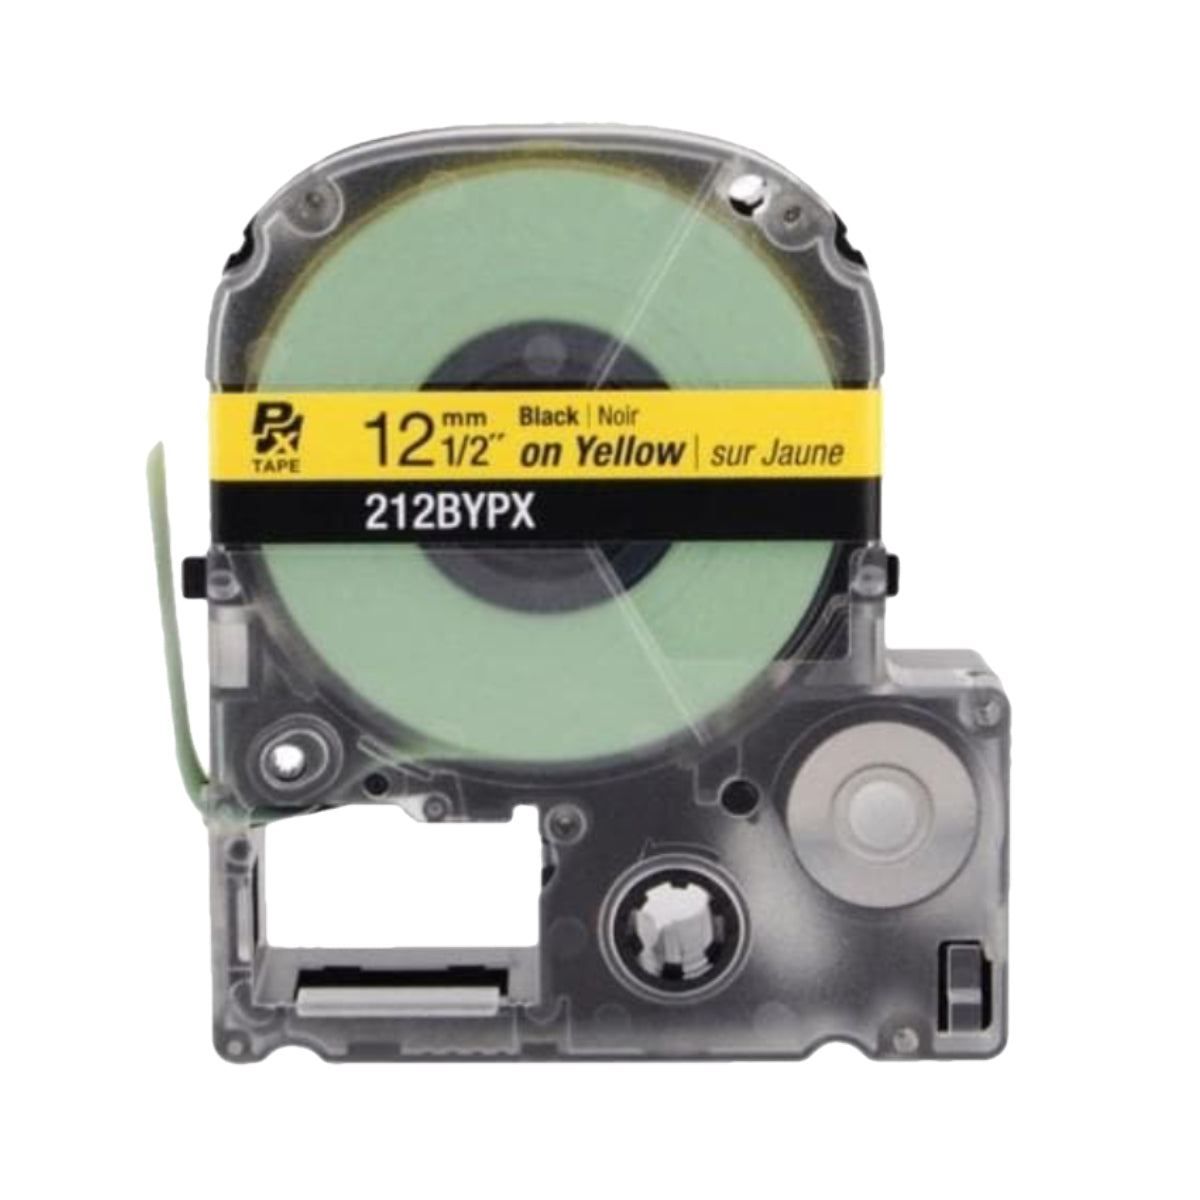 Epson LABELWORKS PX 12mm 212BYPX Tape, Black on Yellow, 1/2 in